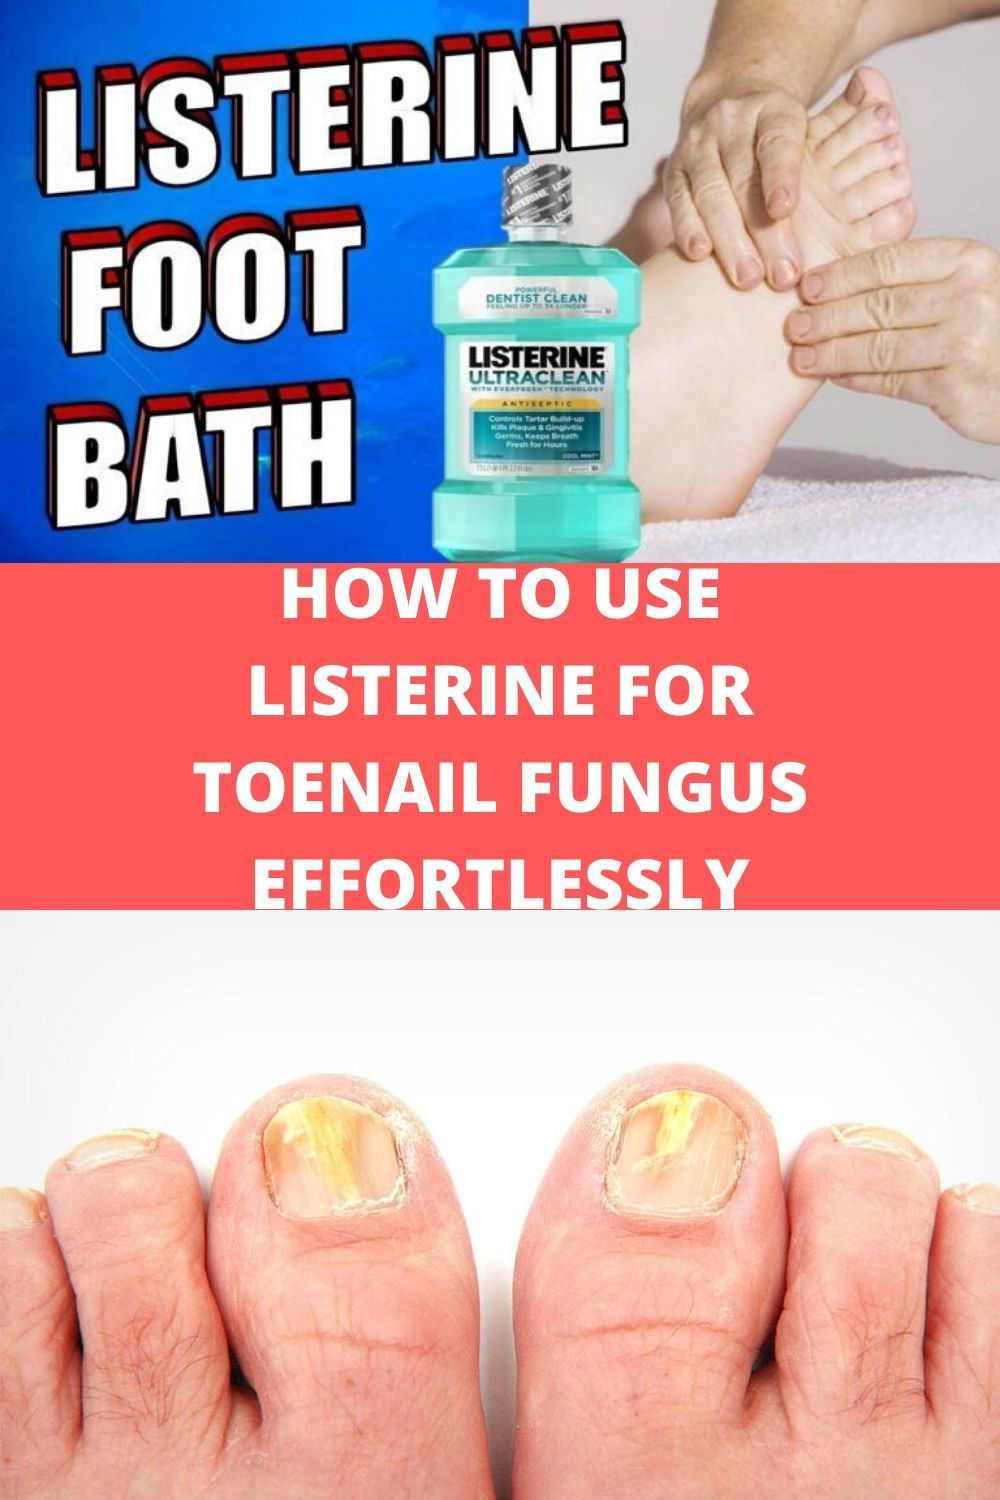 HOW TO USE LISTERINE FOR TOENAIL FUNGUS EFFORTLESSLY ...